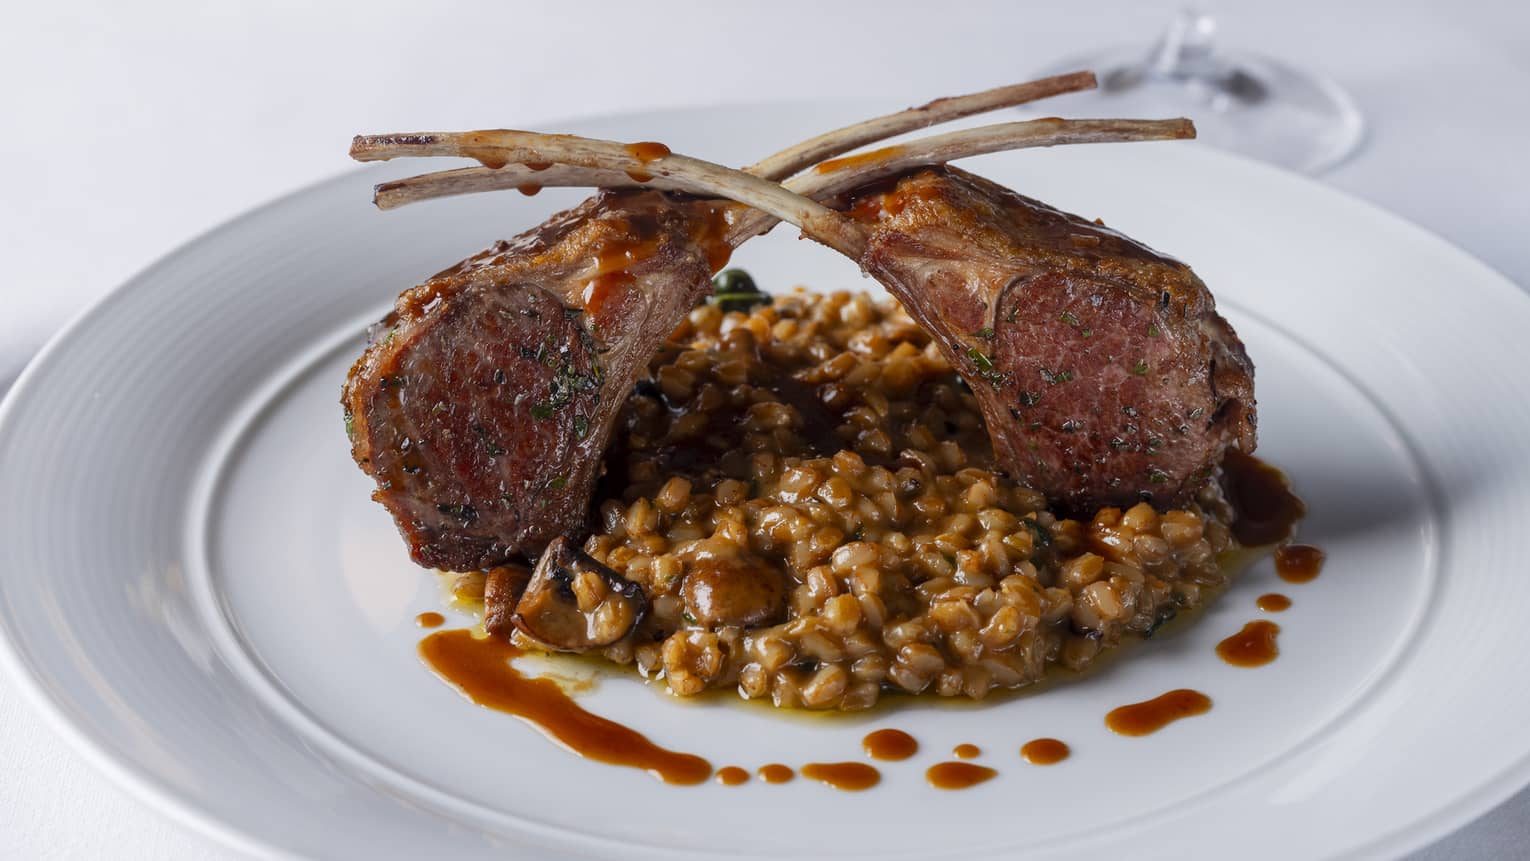 Lamb rack marinated with fresh herbs and lemon, served in a mushroom and spinach farro risotto with red wine and truffle sauce plated on a white, round dish